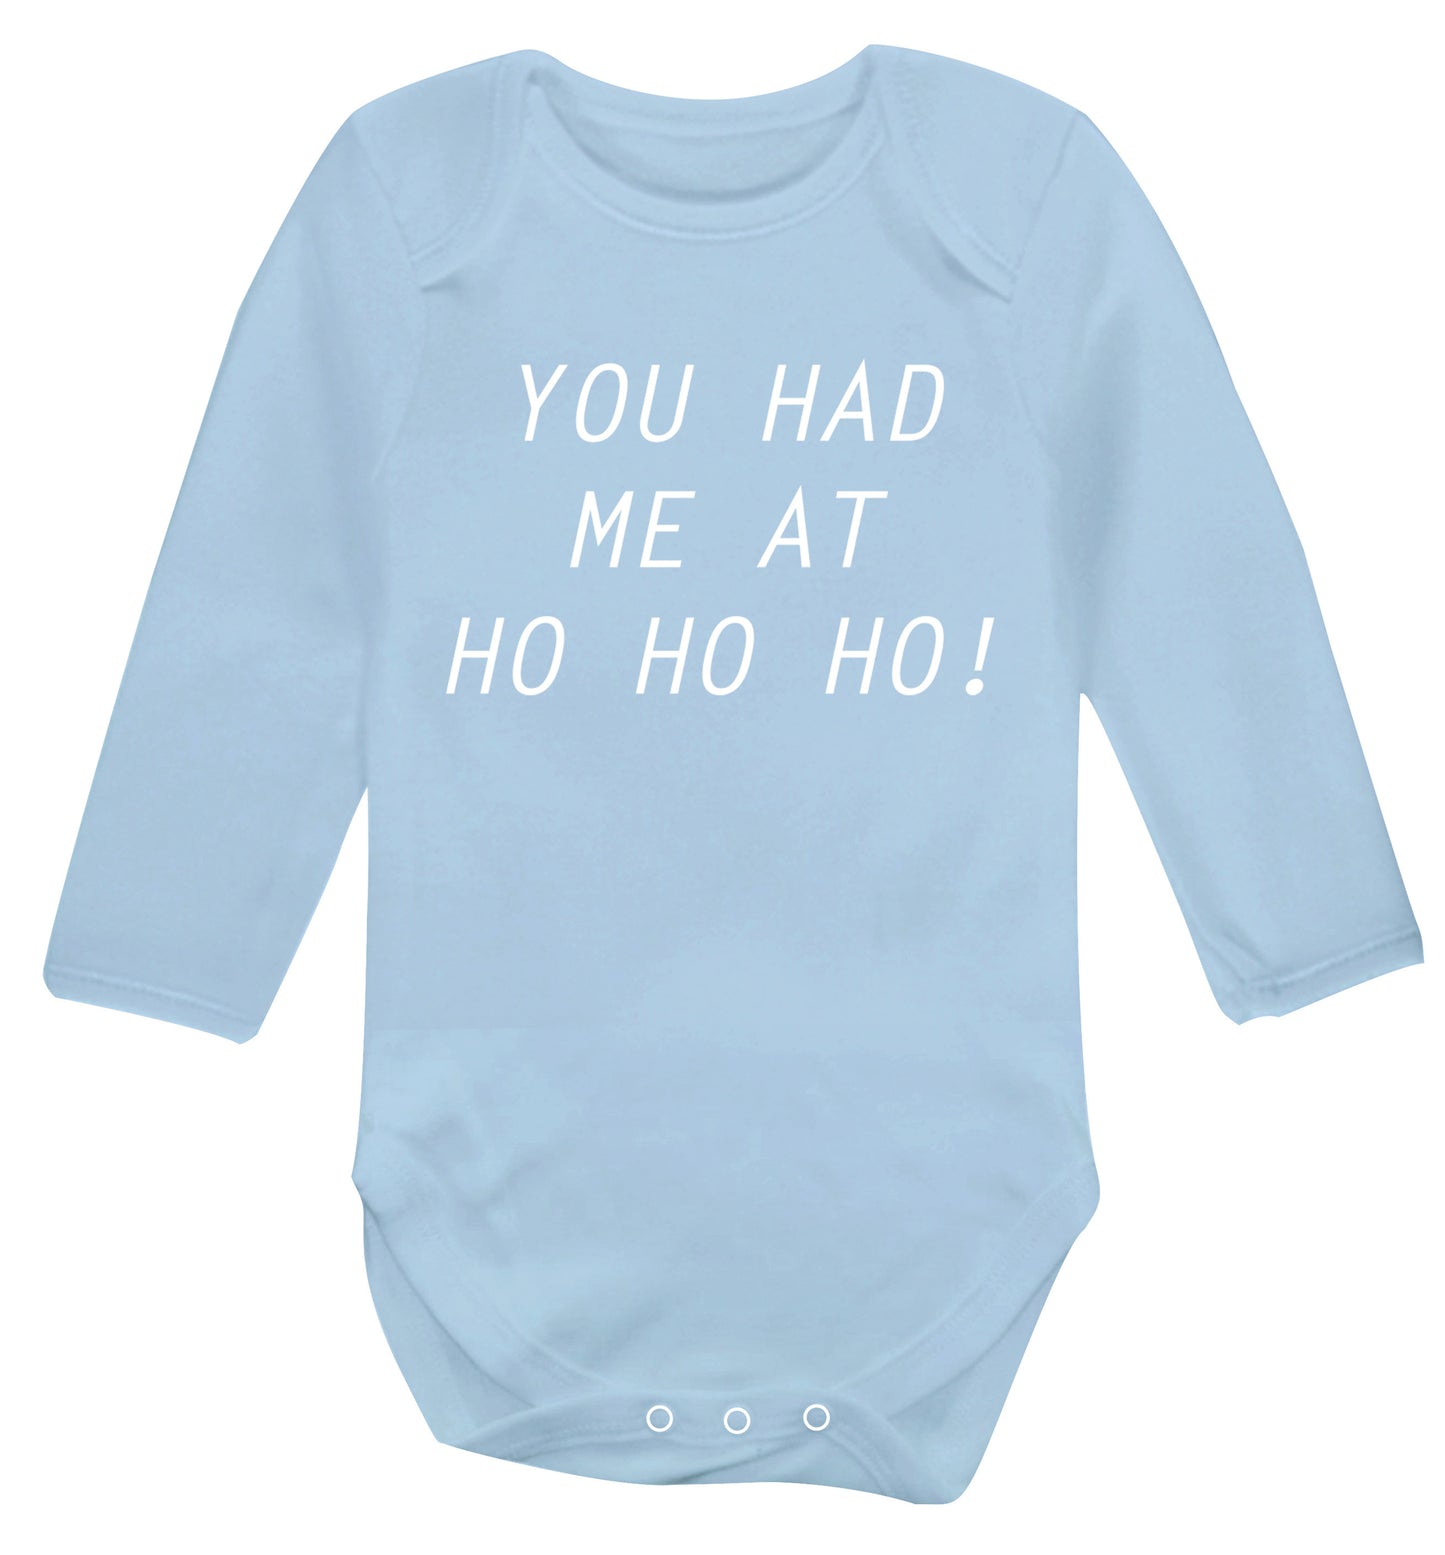 You had me at ho ho ho Baby Vest long sleeved pale blue 6-12 months